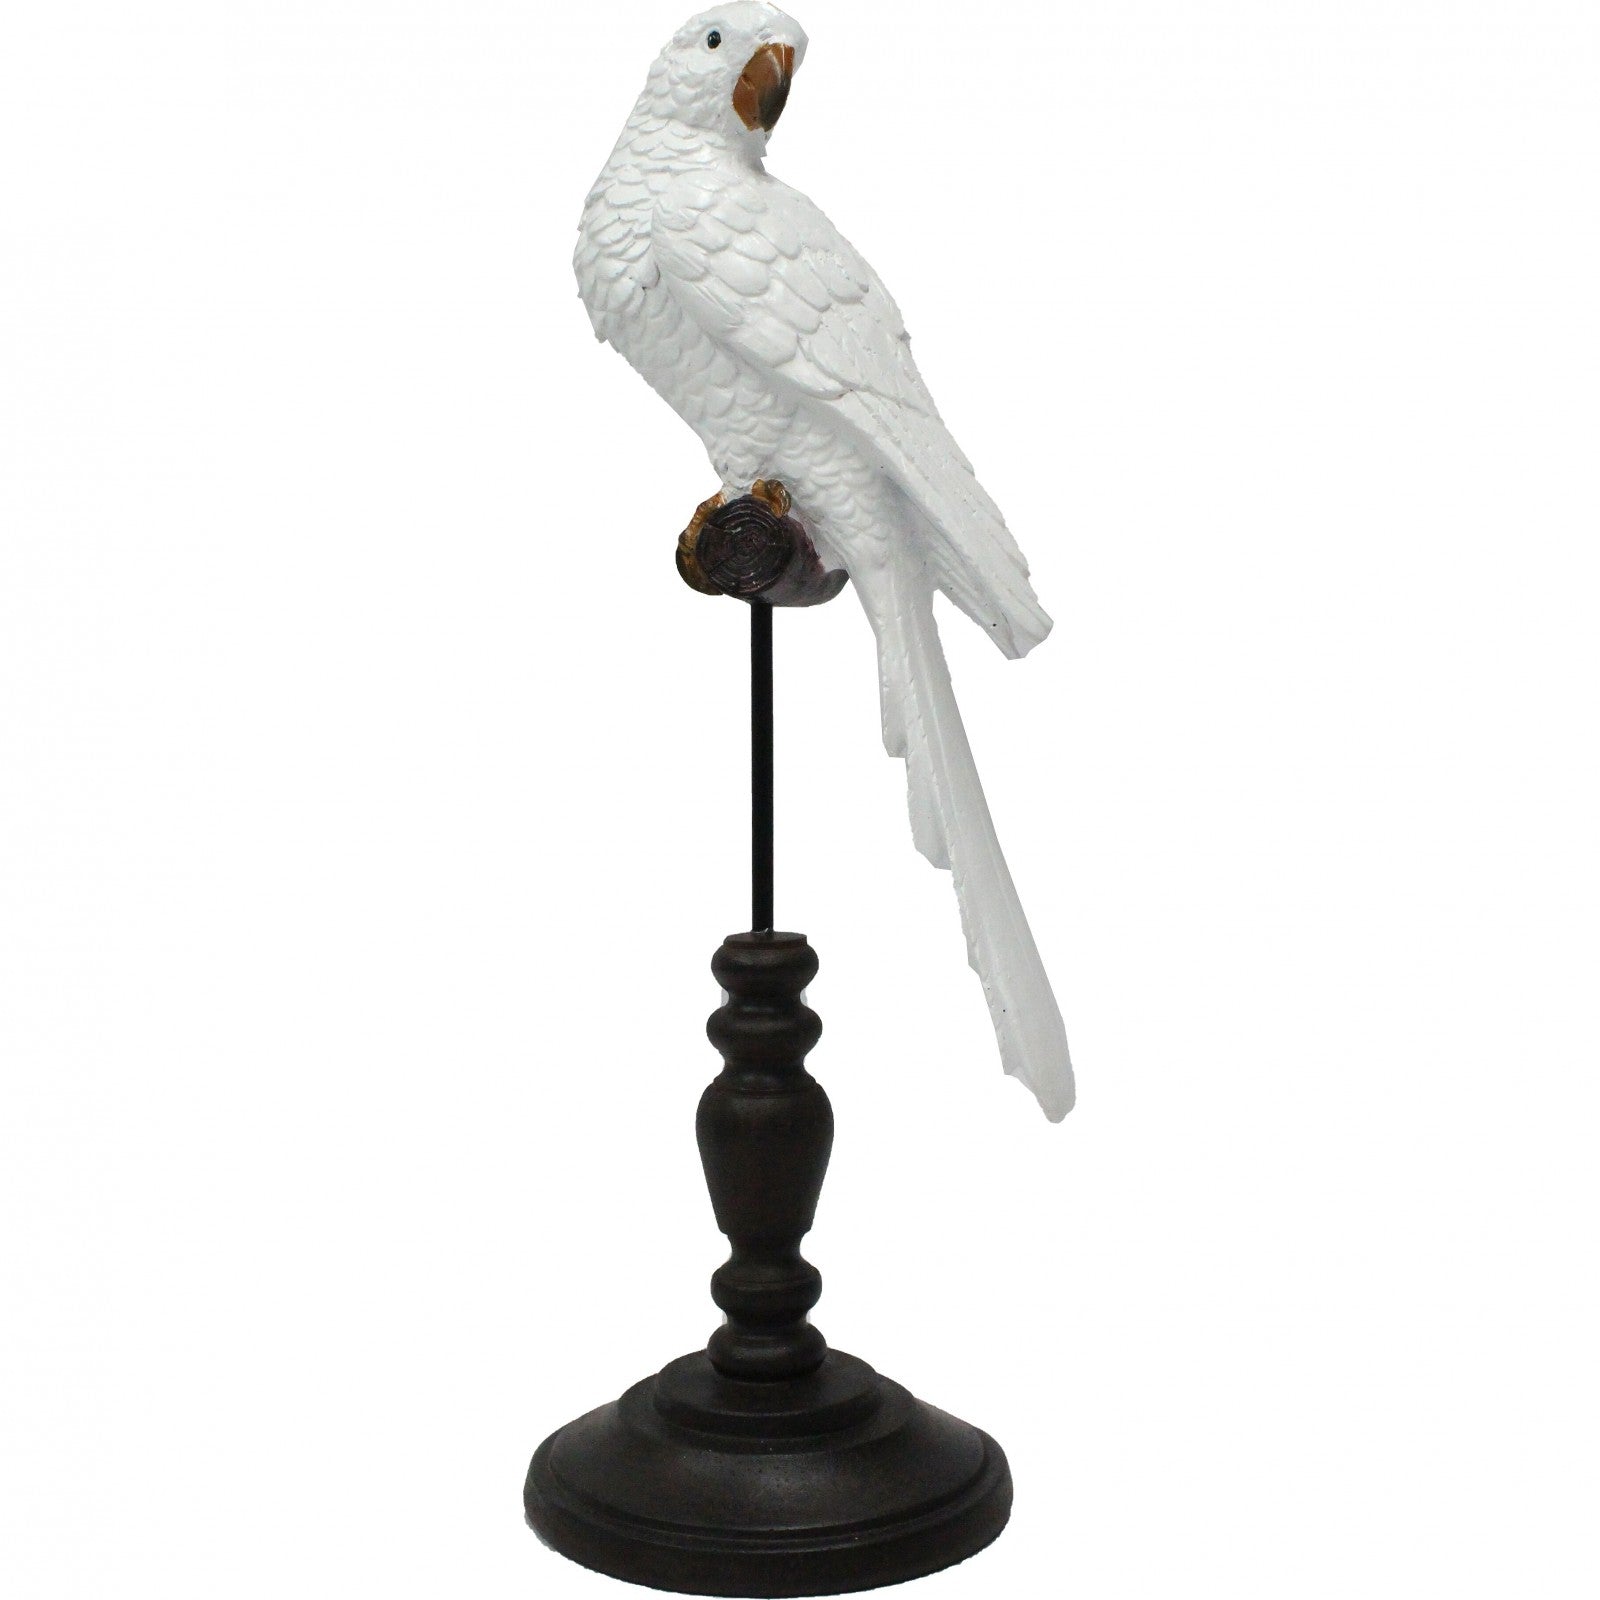 Parrot Bird On Stand Ornament - The Renmy Store